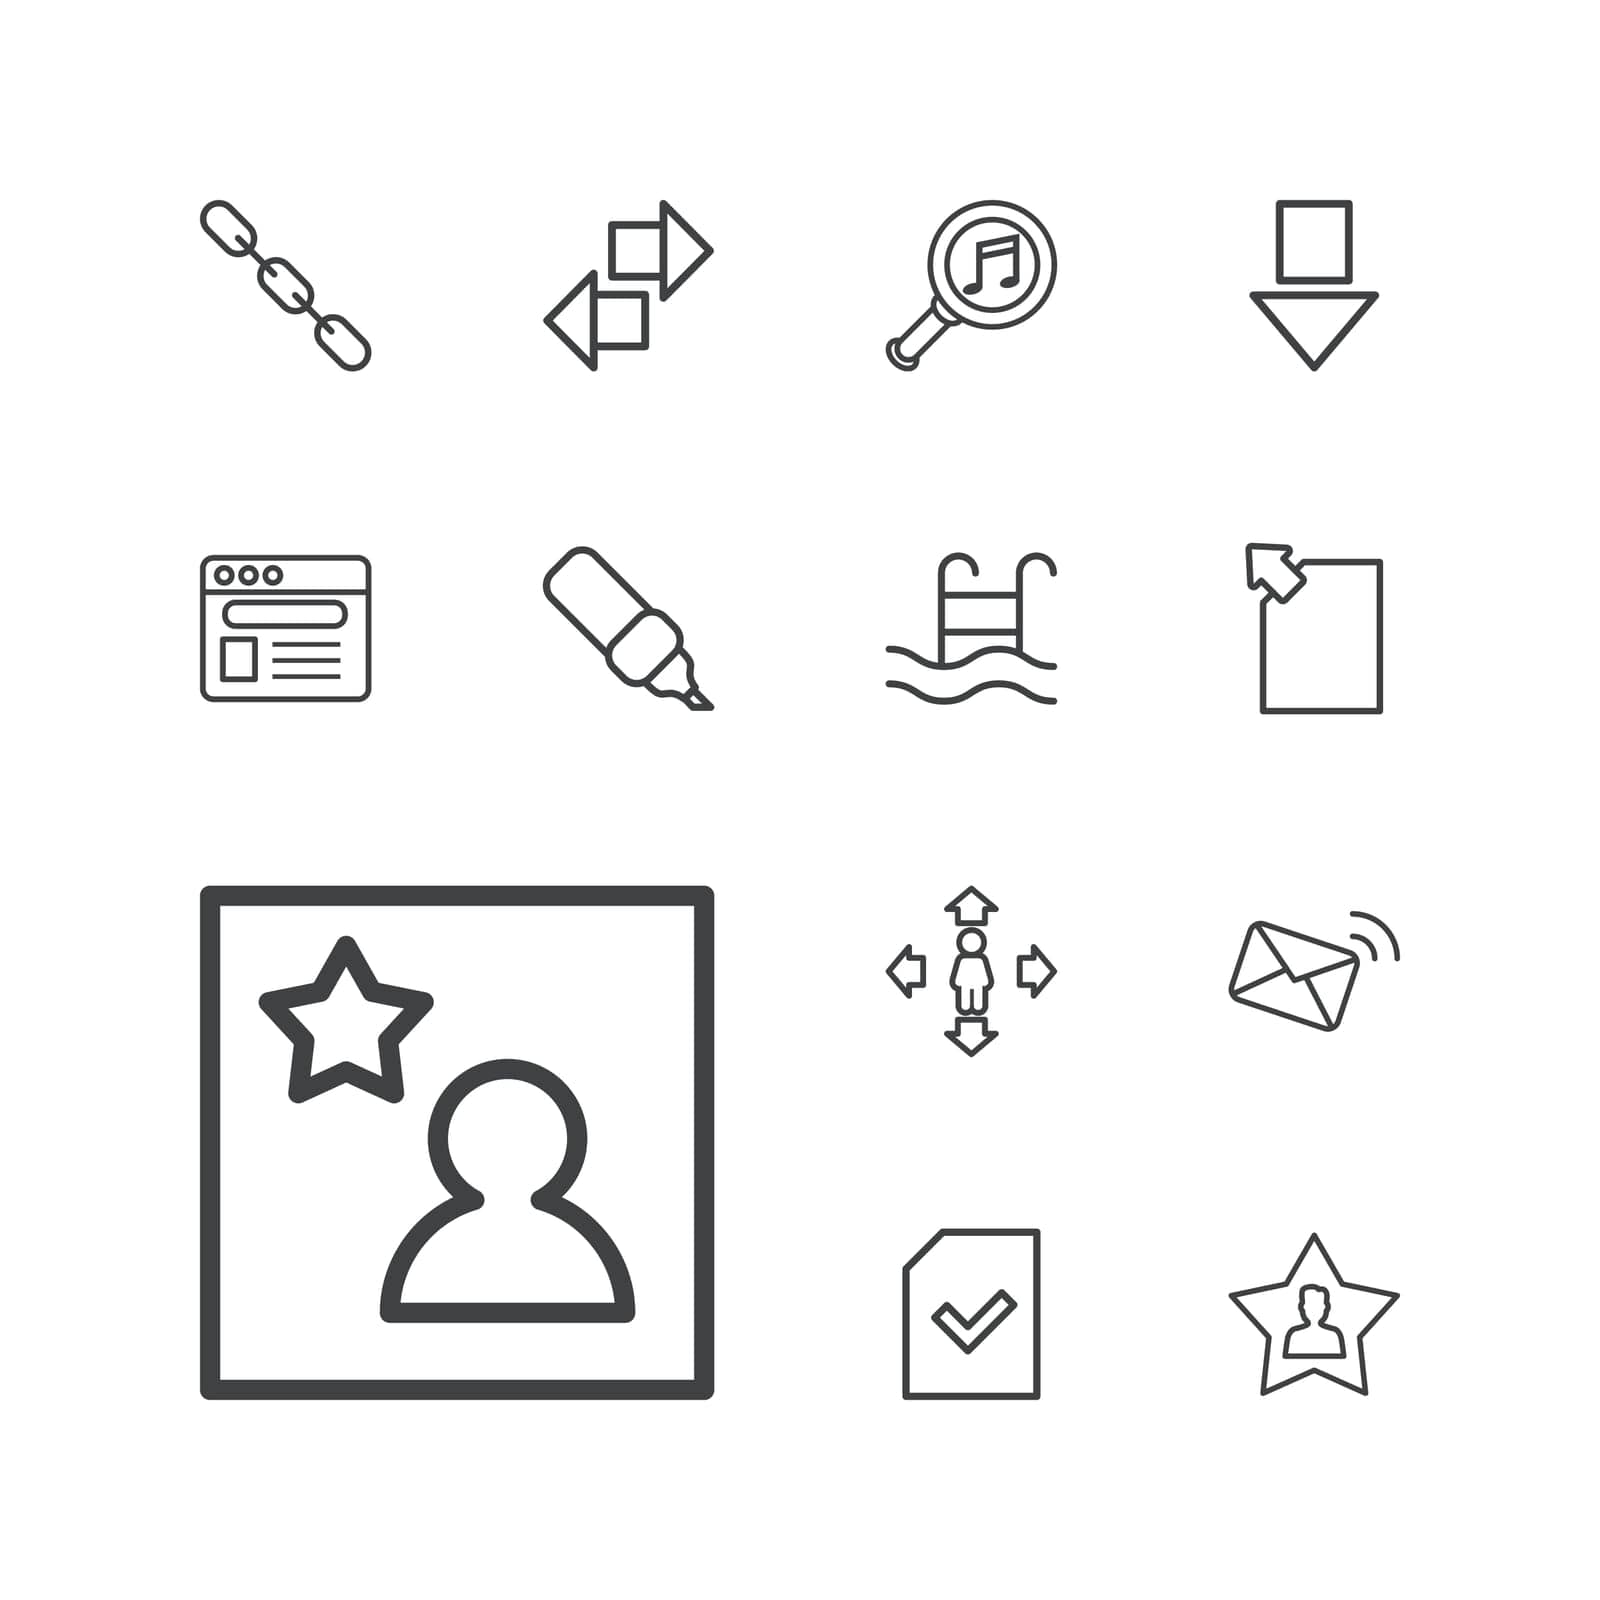 symbol,data,mail,arrow,concept,document,icon,sign,isolated,interface,down,button,swimming,download,music,file,white,web,flat,design,browser,pen,vector,man,communication,graphic,element,chain,move,set,business,serach,black,pool,photo,favourite,background,illustration,favorite,user,internet by ogqcorp